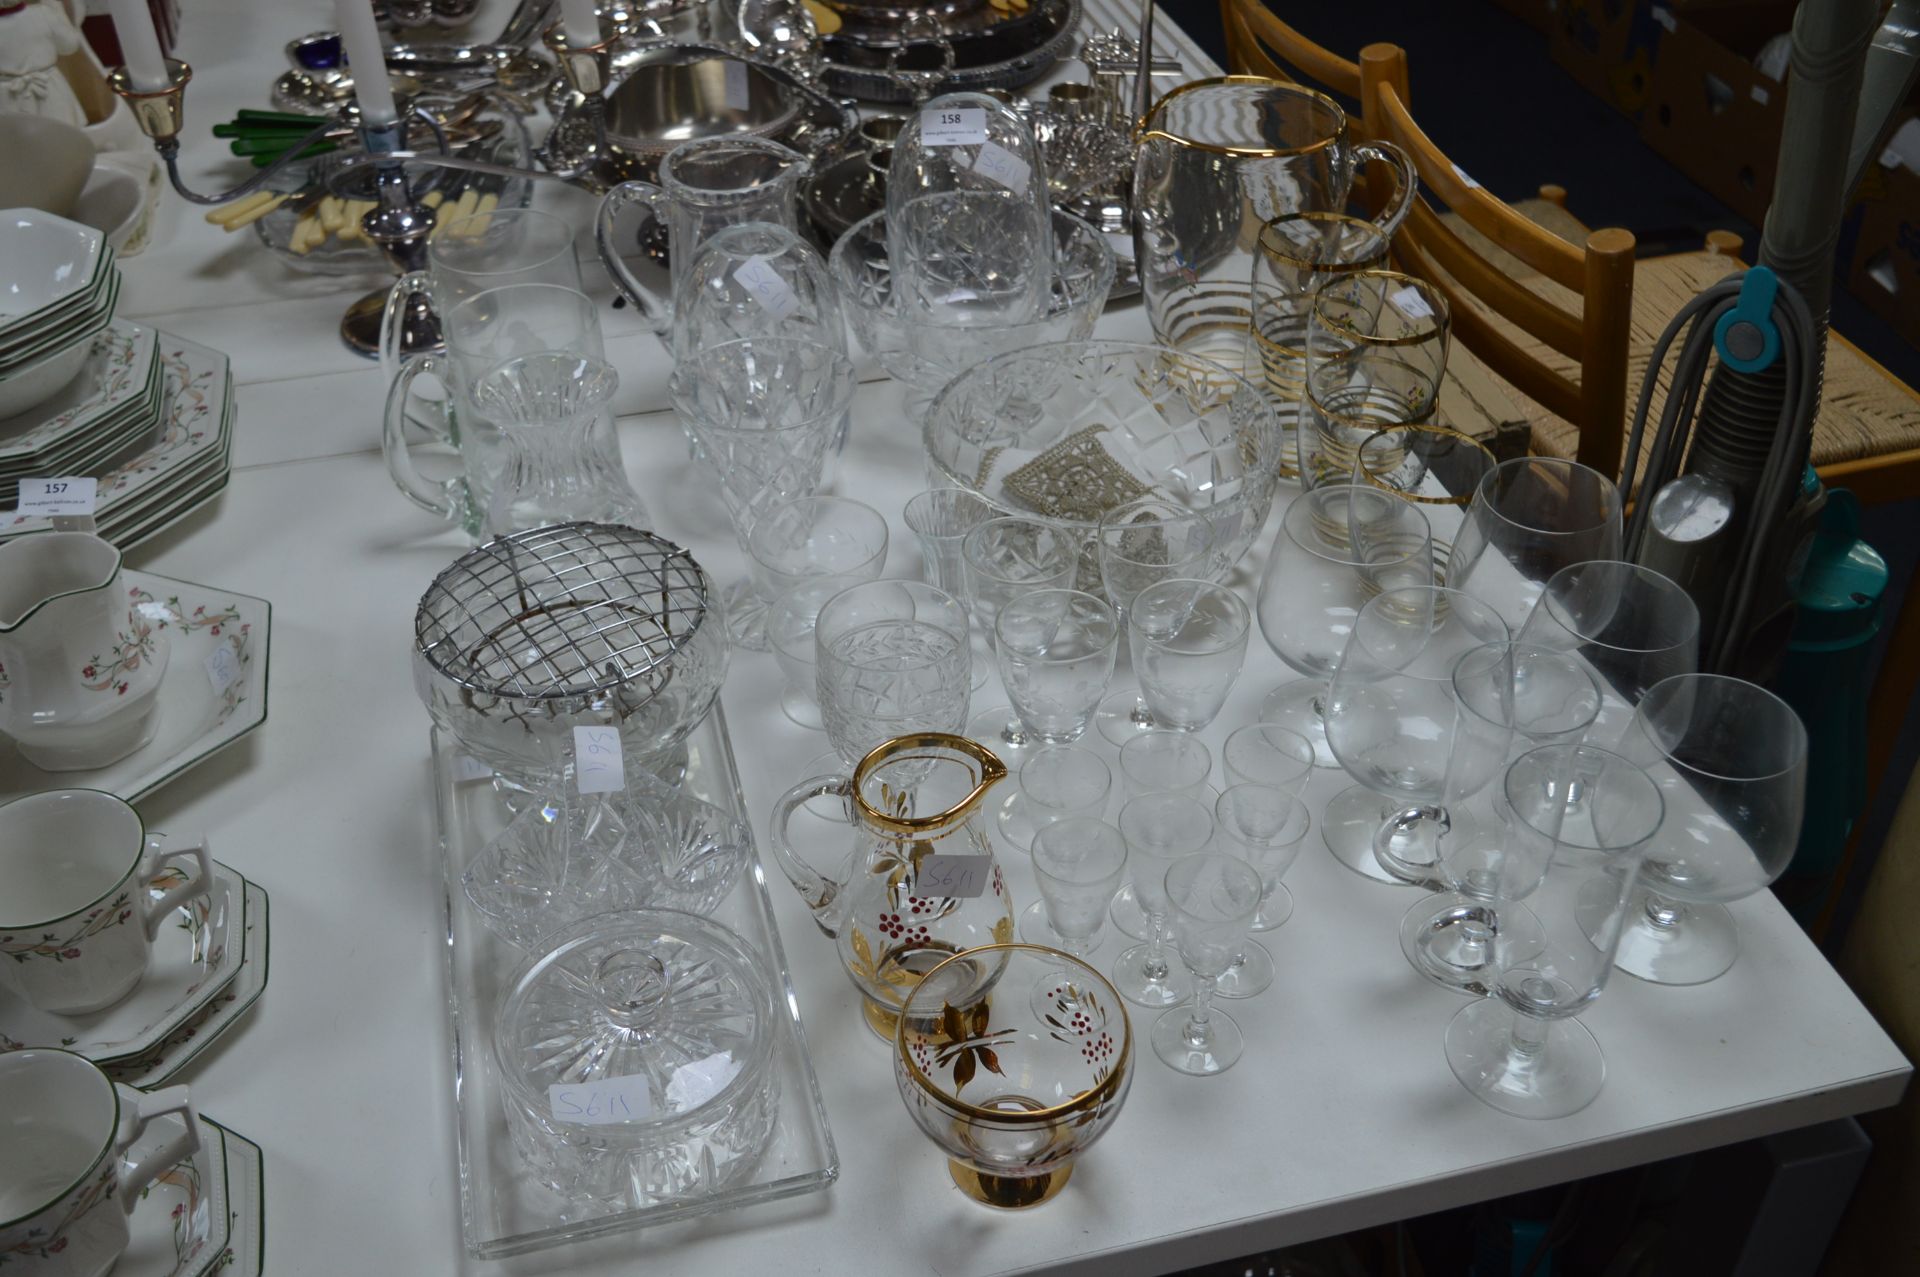 Large Quantity of Glassware, Vases, Jugs, Drinking